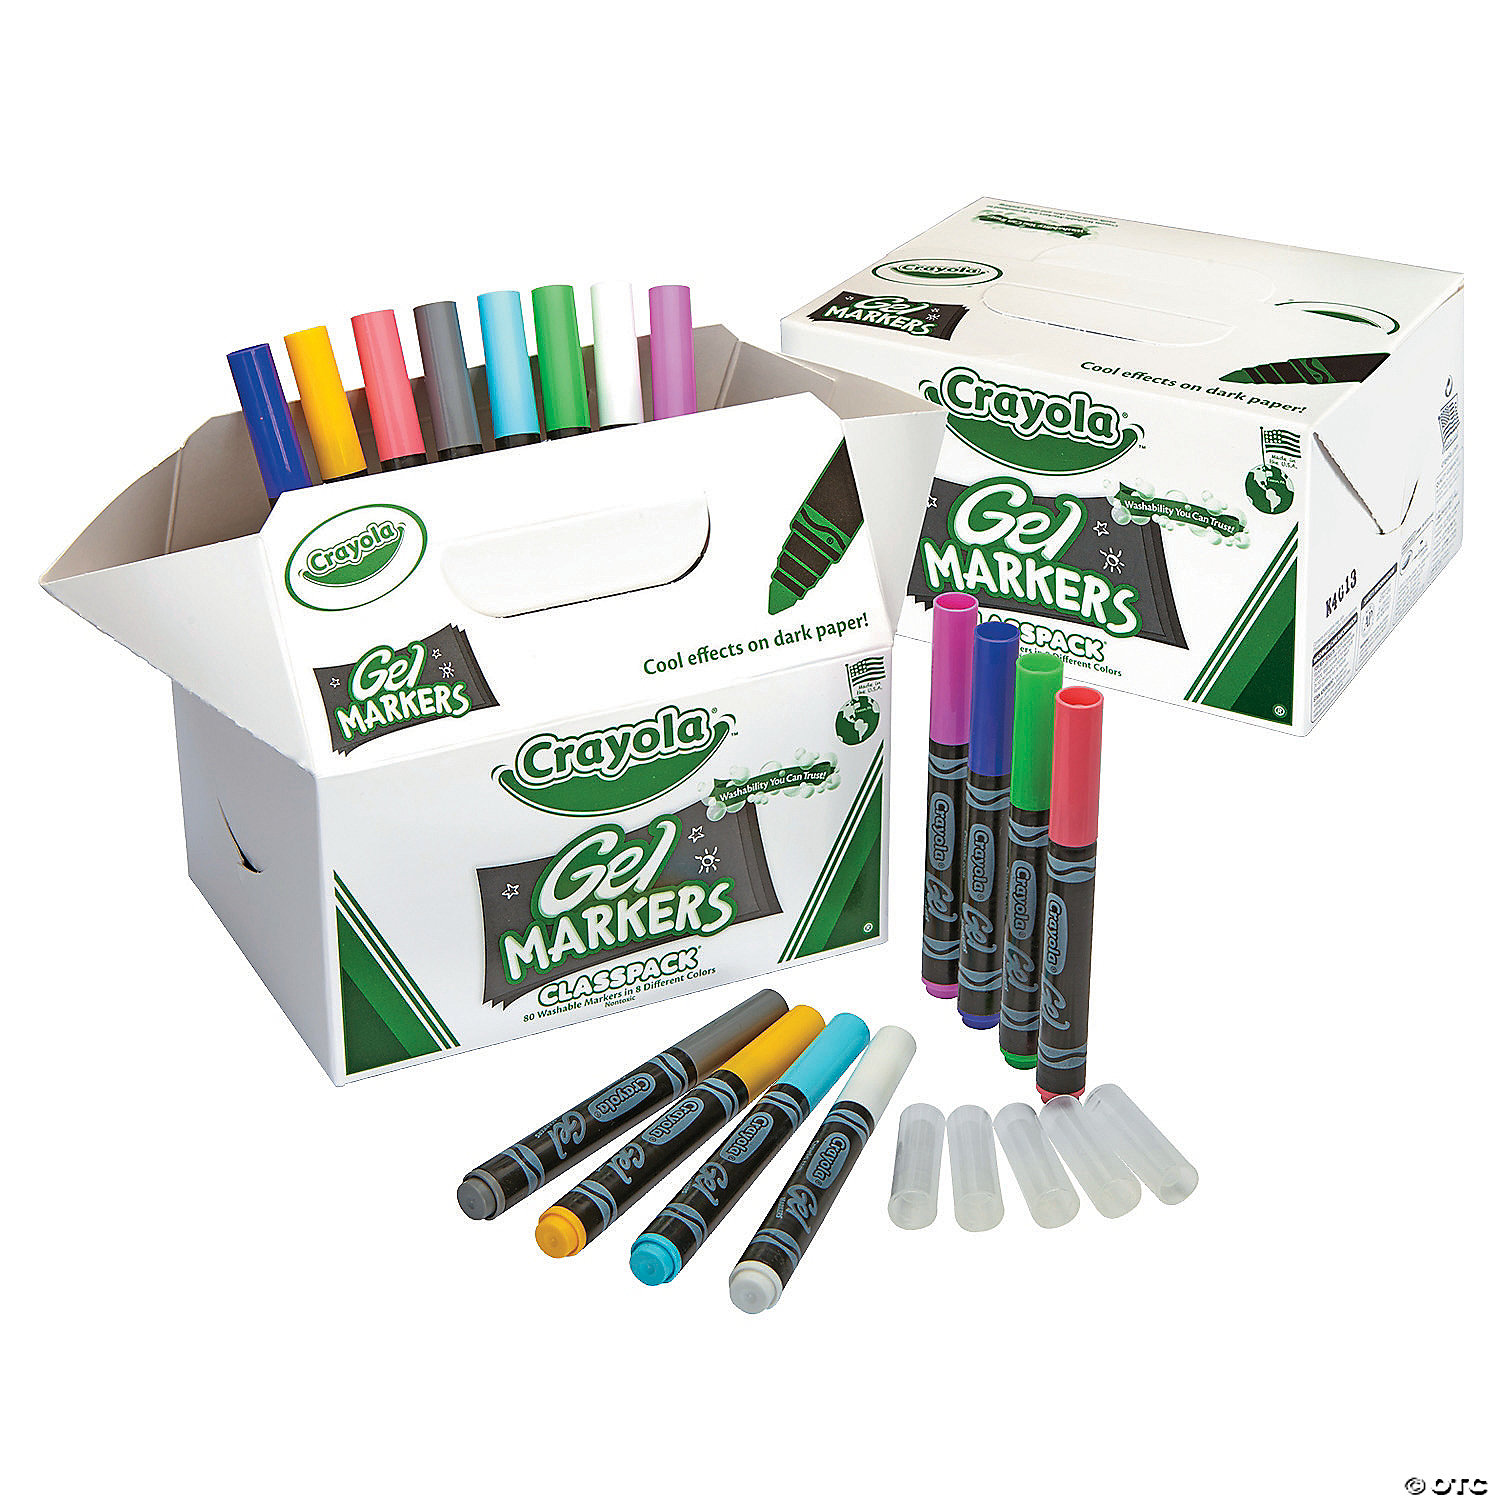 Crayola Gel Markers Review 